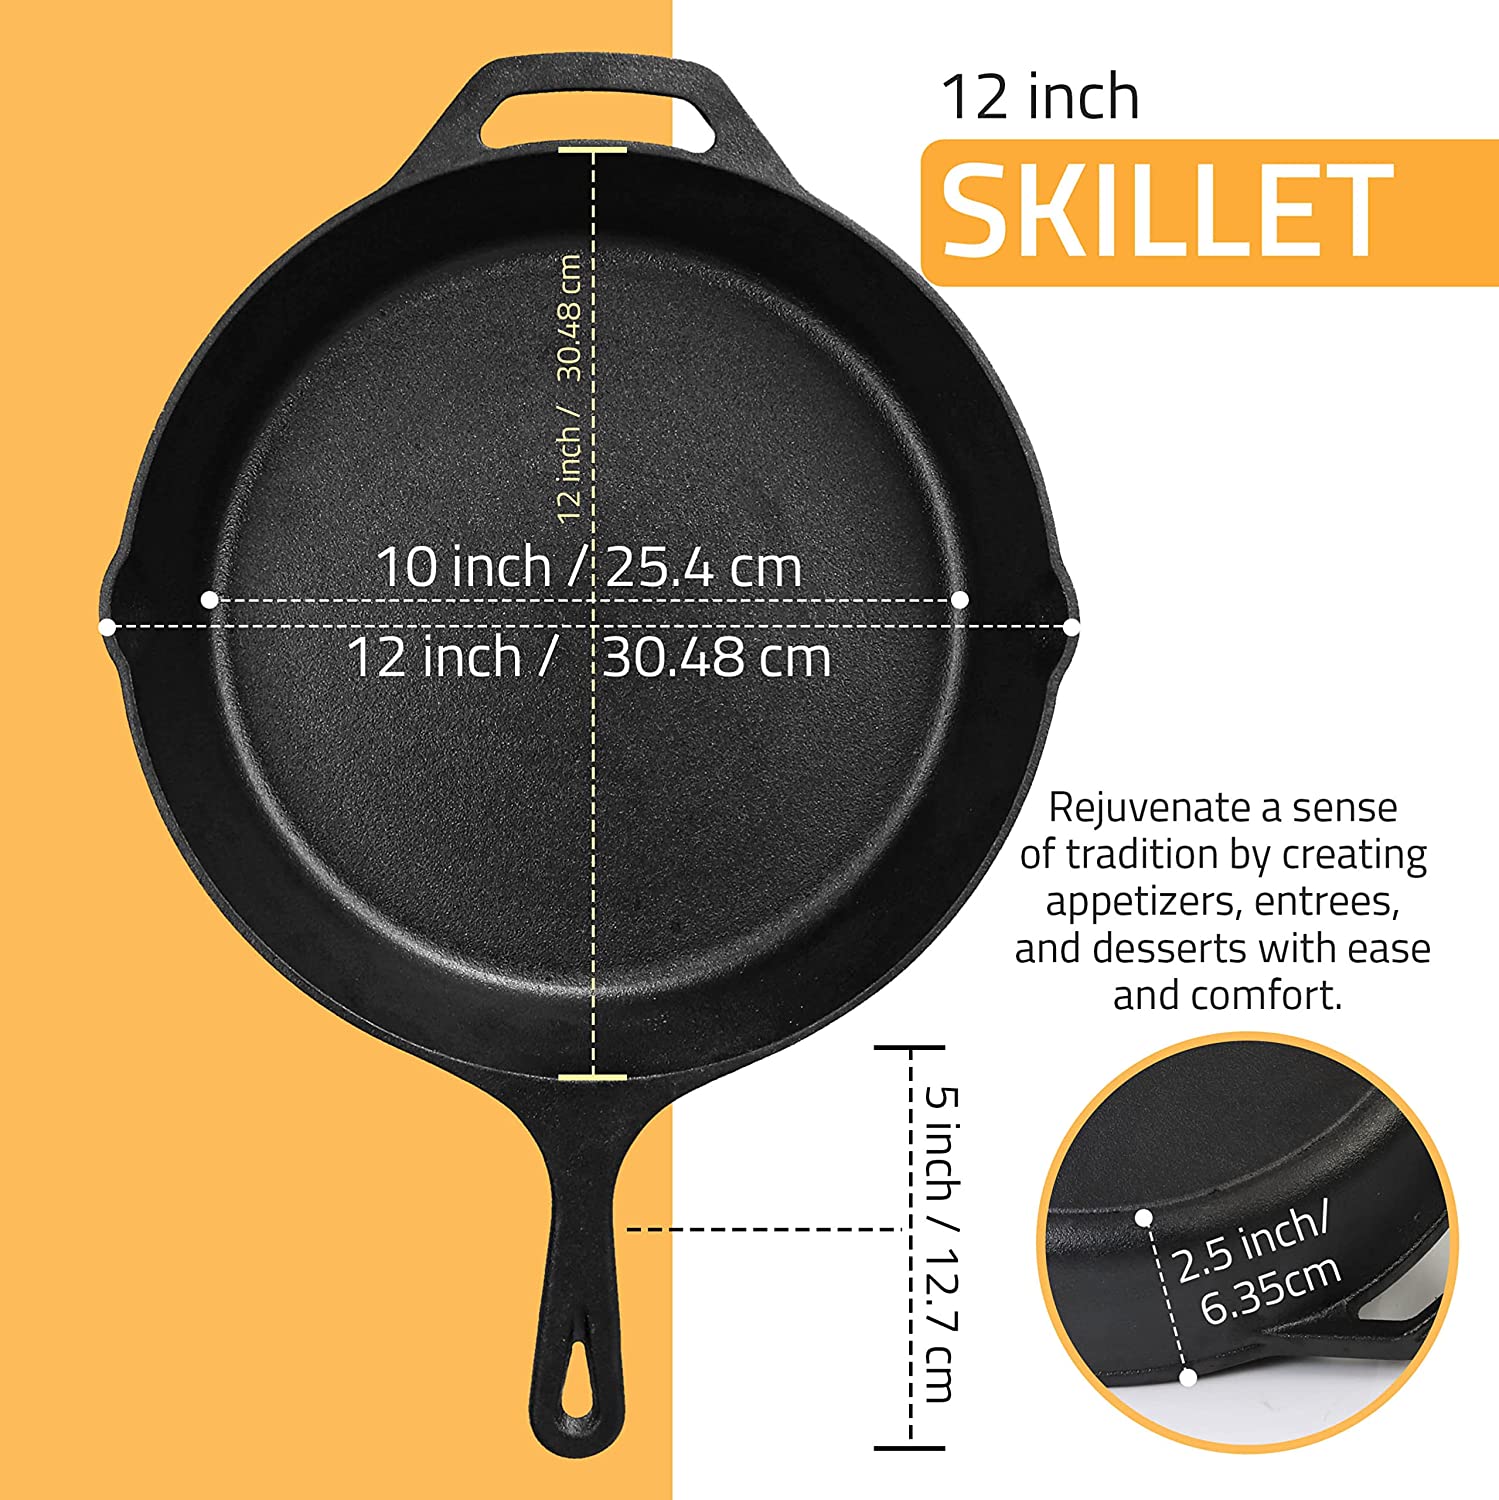 Utopia Kitchen Saute Fry Pan Pre-Seasoned Cast Iron Skillet with Lid - 12 inch Nonstick Frying Pan - Cast Iron Pan - Safe Grill Cookware for Indoor